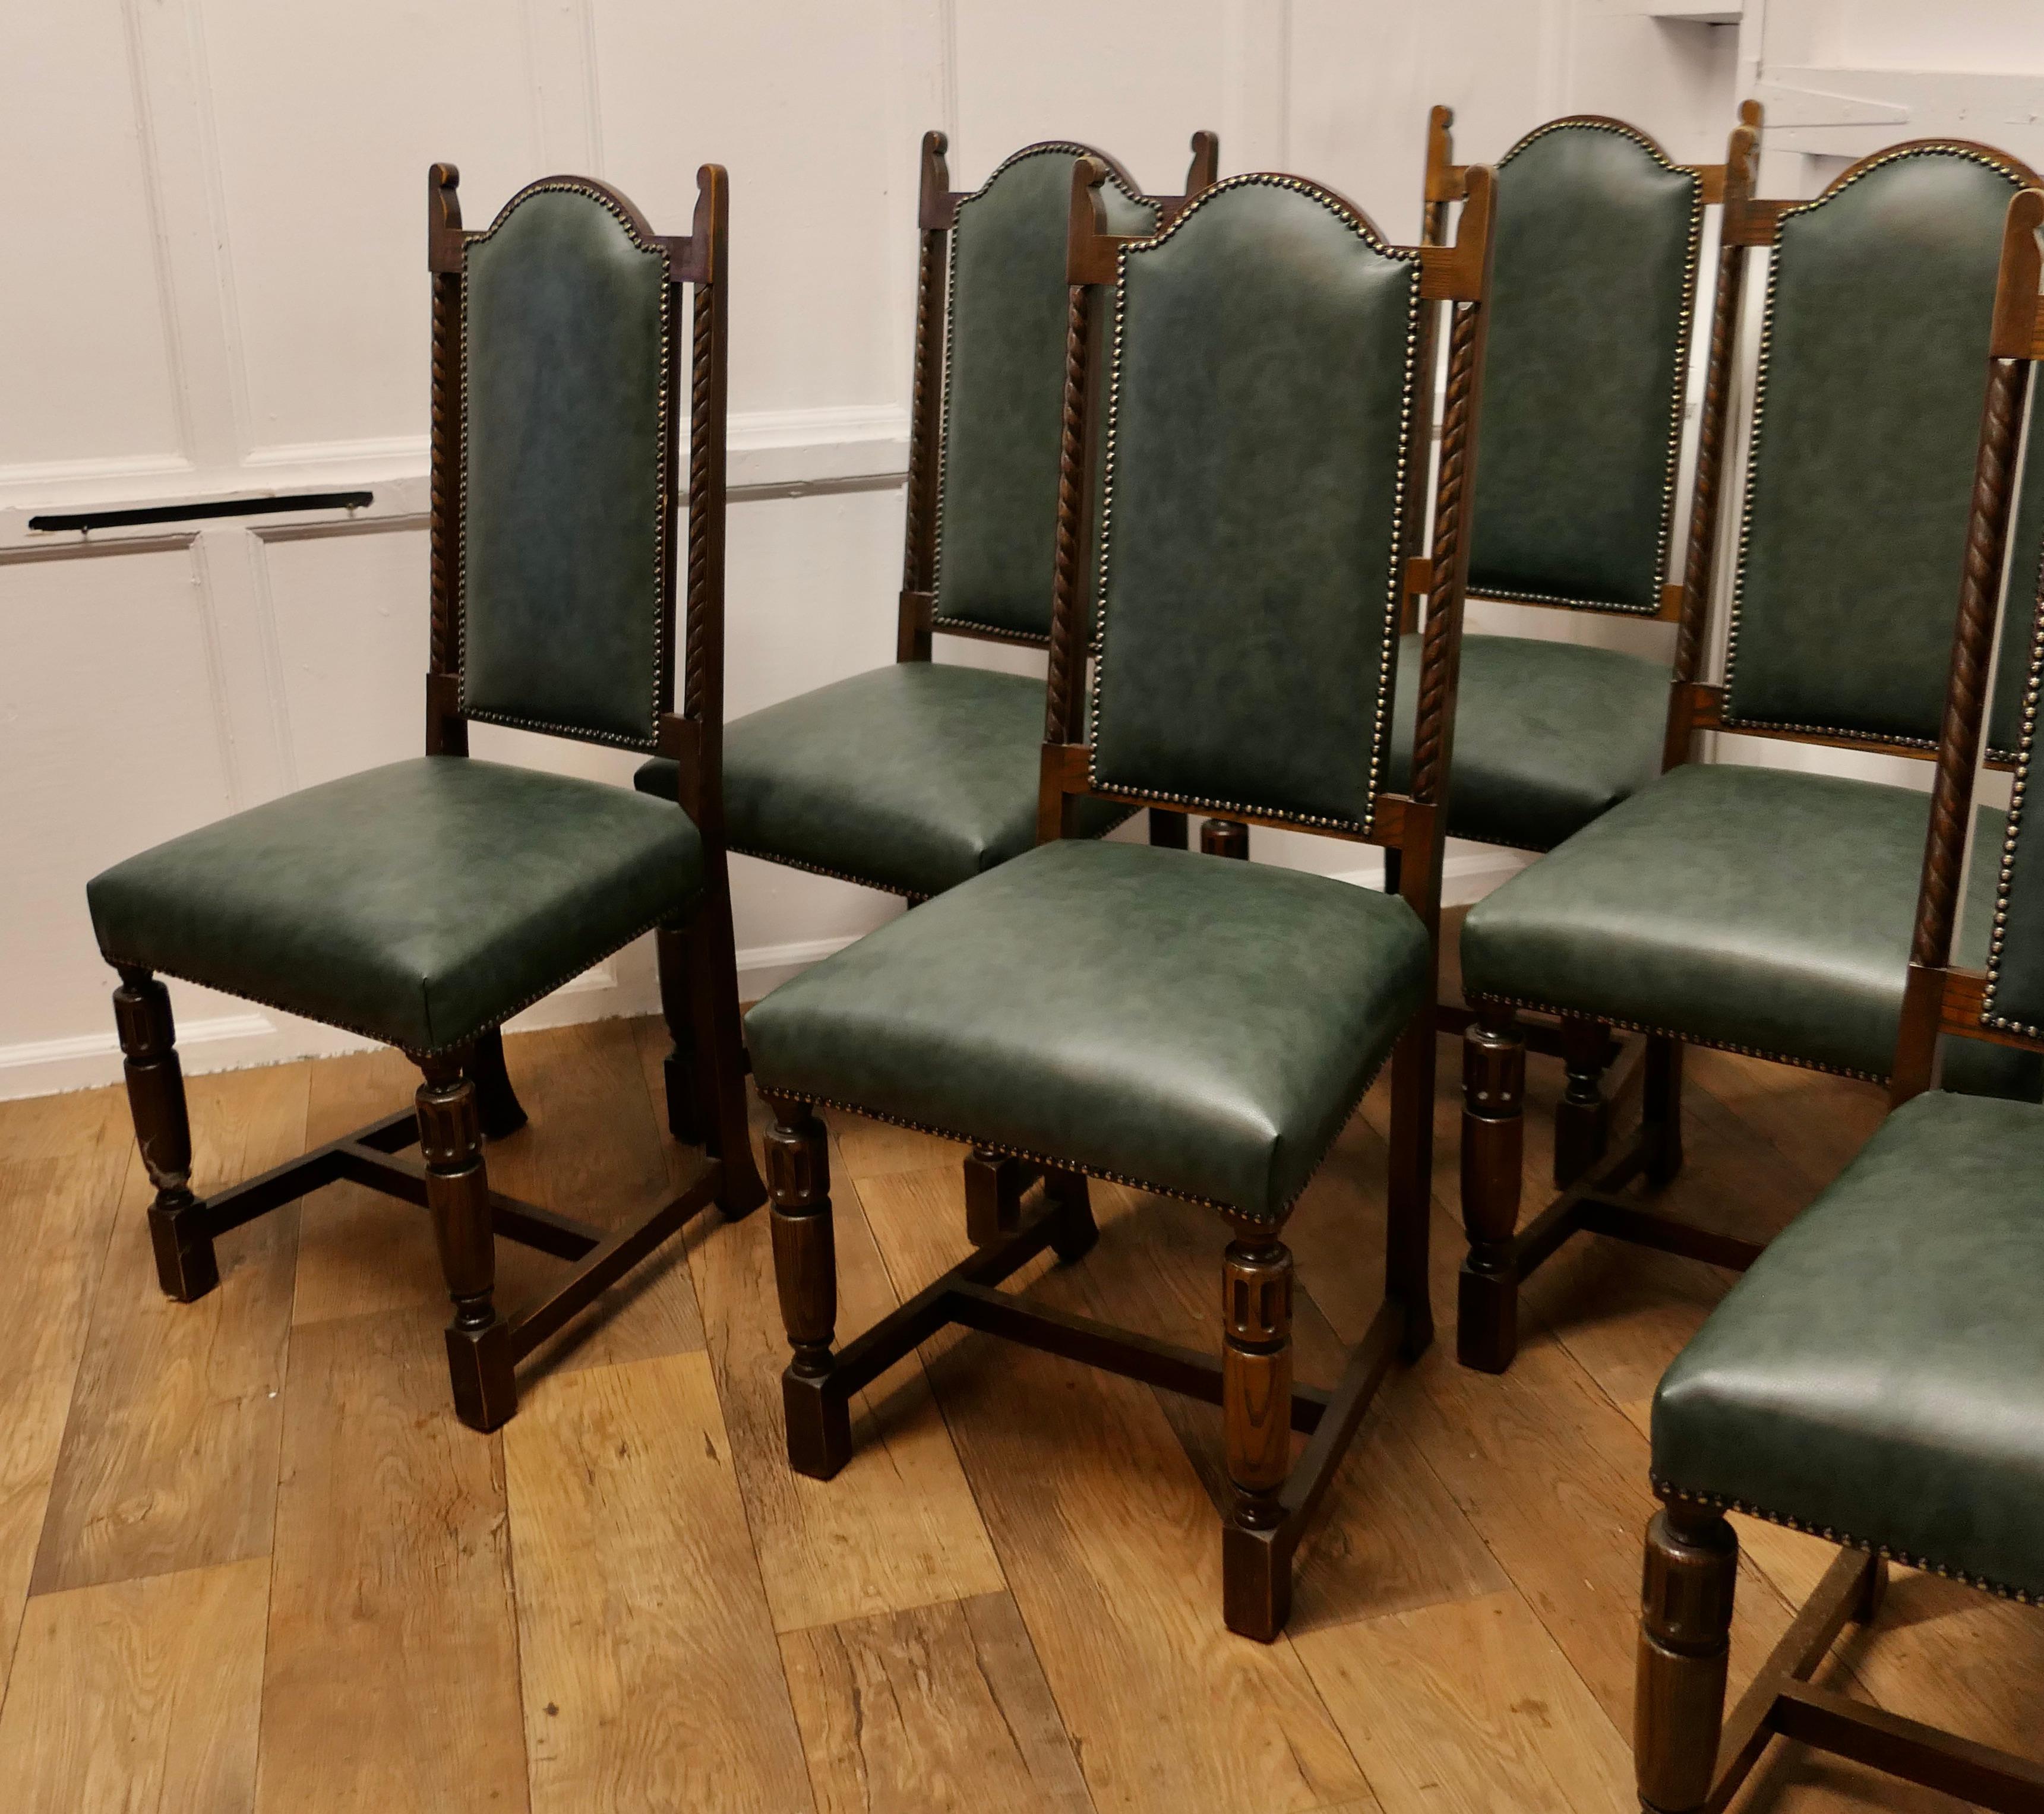 Set of 6 Arts and Crafts Gothic Oak Leather Dining Chairs

This is a good set of Arts and Crafts Dining Chairs, they are in the gothic style with high backs and barley twist carving
The chairs have turned legs and are upholstered back and front in